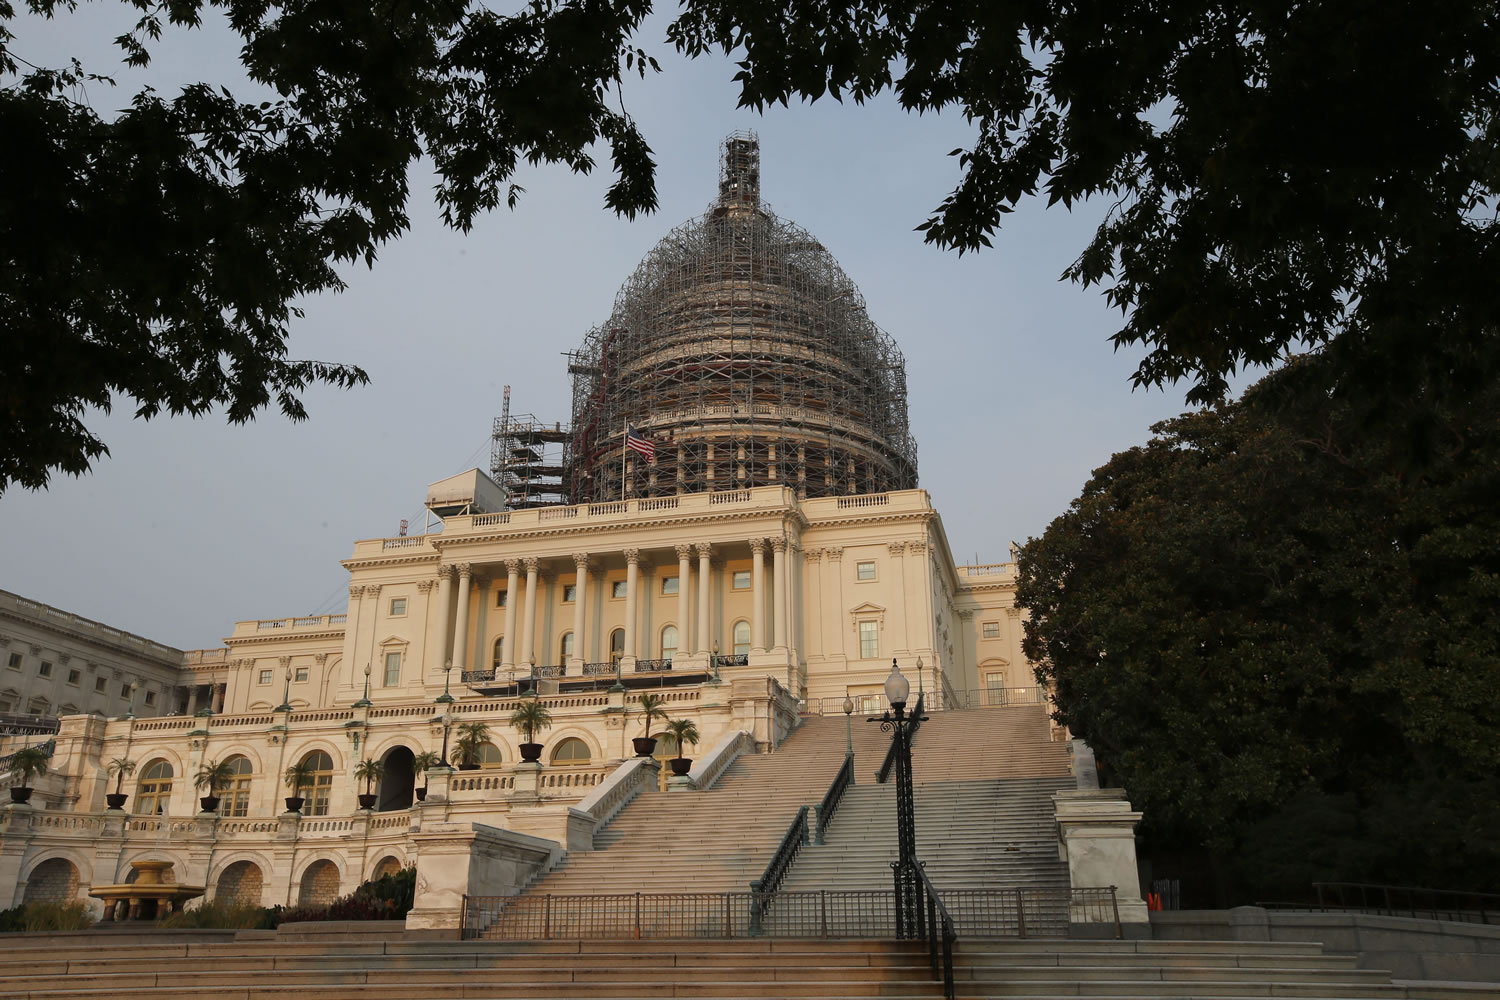 The west front of the U.S. Capitol is seen under repair Sept. 2, 2015 in Washington. Congress returns on Sept. 8 with a critical need for a characteristic that has been rare through a contentious spring and summer _ cooperation between Republicans and President Barack Obama. Lawmakers face a weighty list of unfinished business and looming deadlines, with a stopgap spending bill to keep the government open on Oct. 1 paramount.